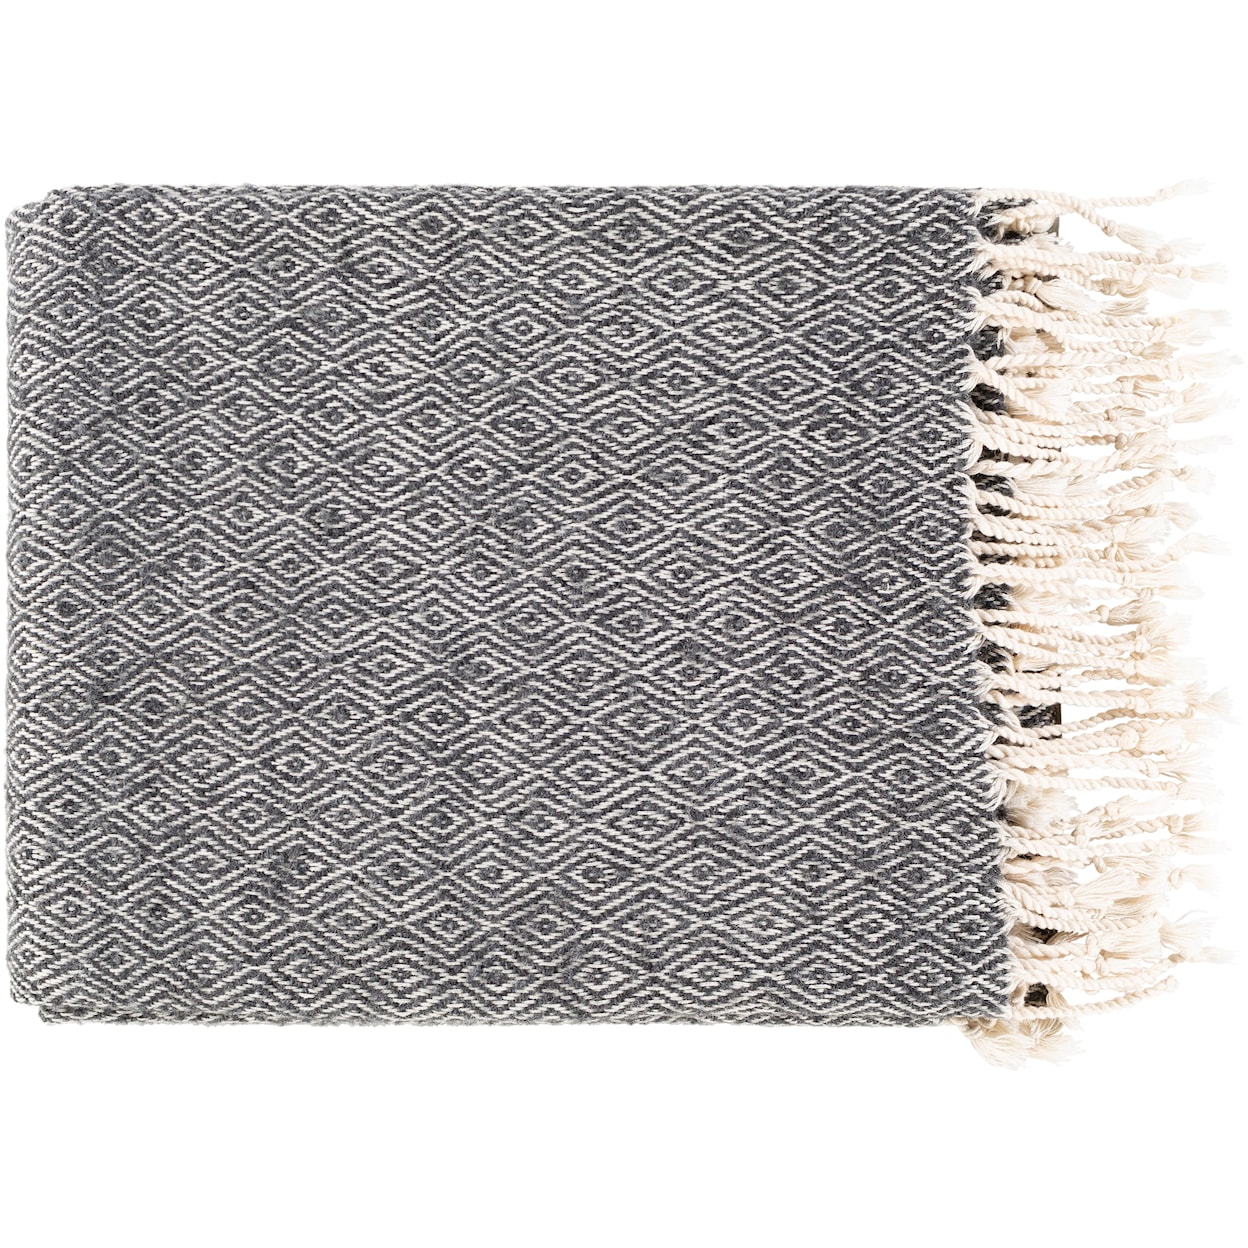 Surya Rugs Hamlet Miscellaneous Accessories